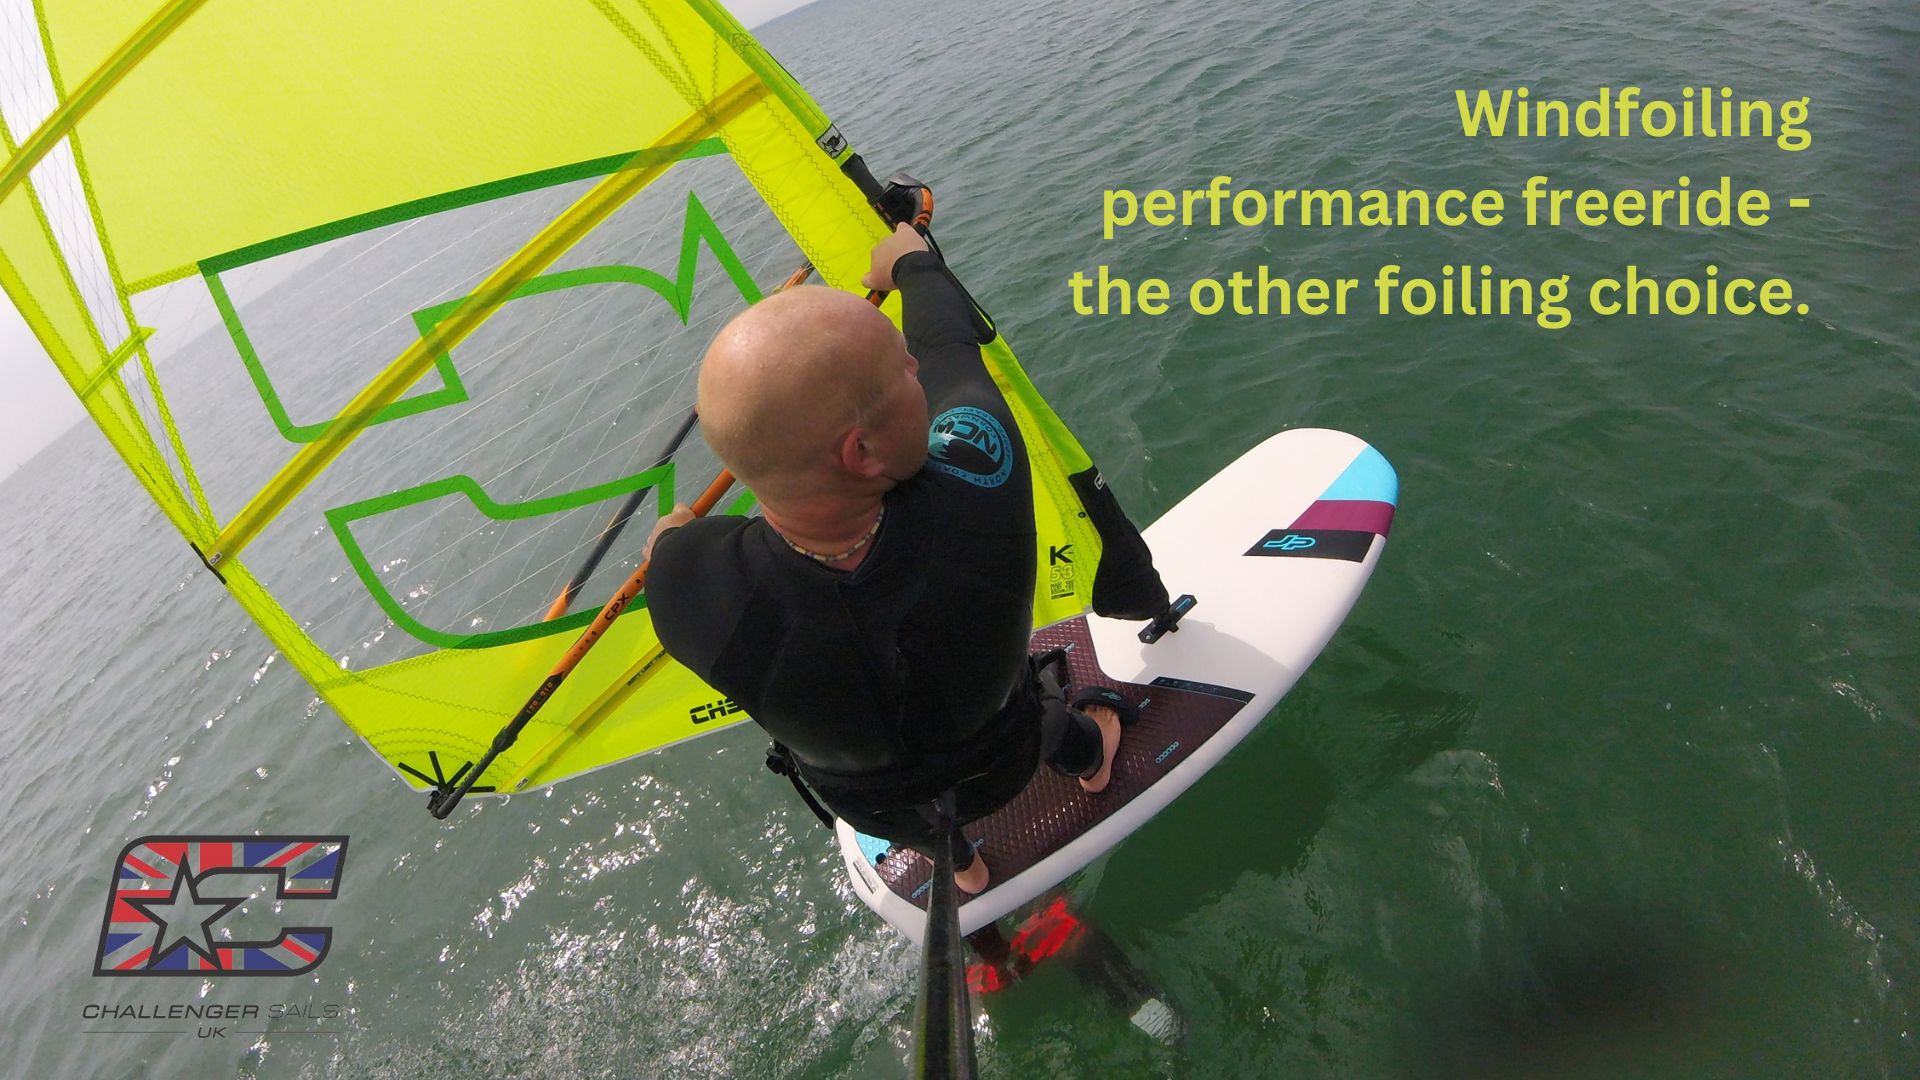 Windfoiling performance freeride – the other foiling choice.